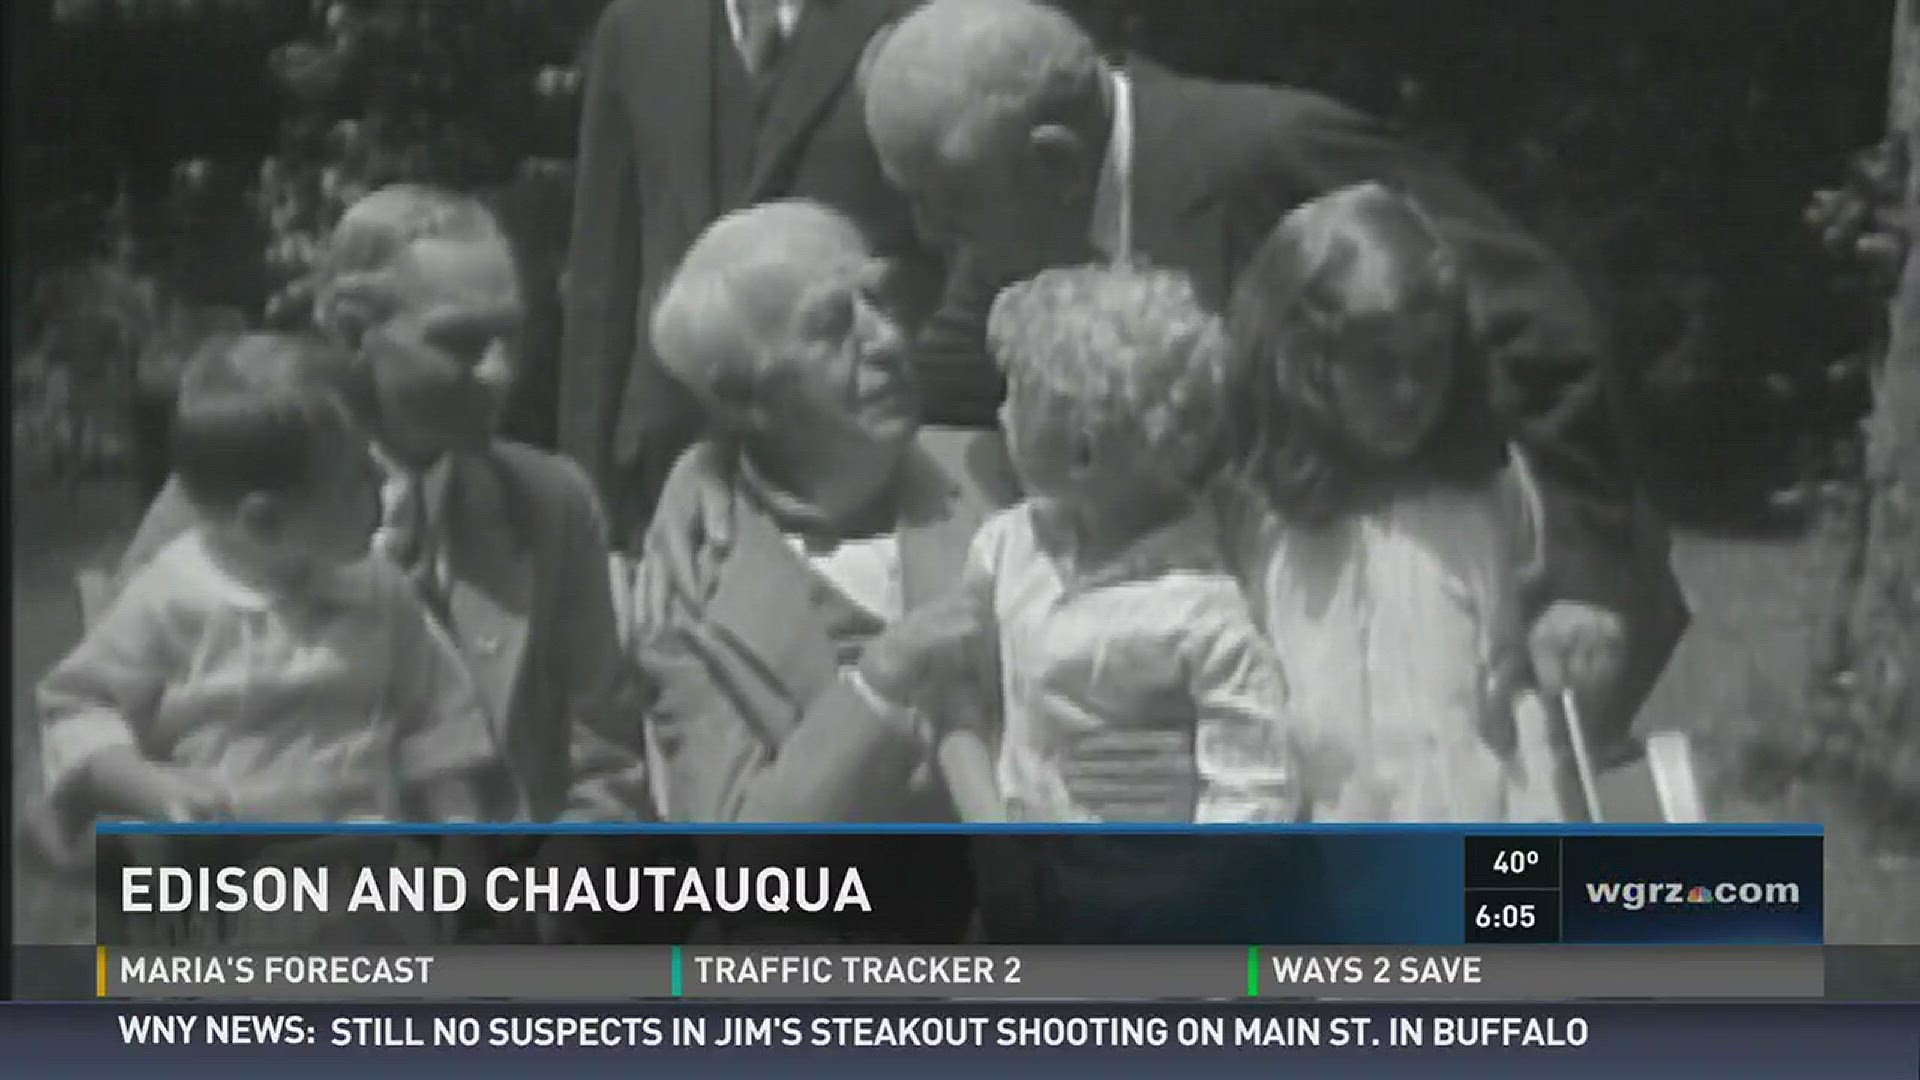 Unknown Stories of WNY: Edison and Chautauqua